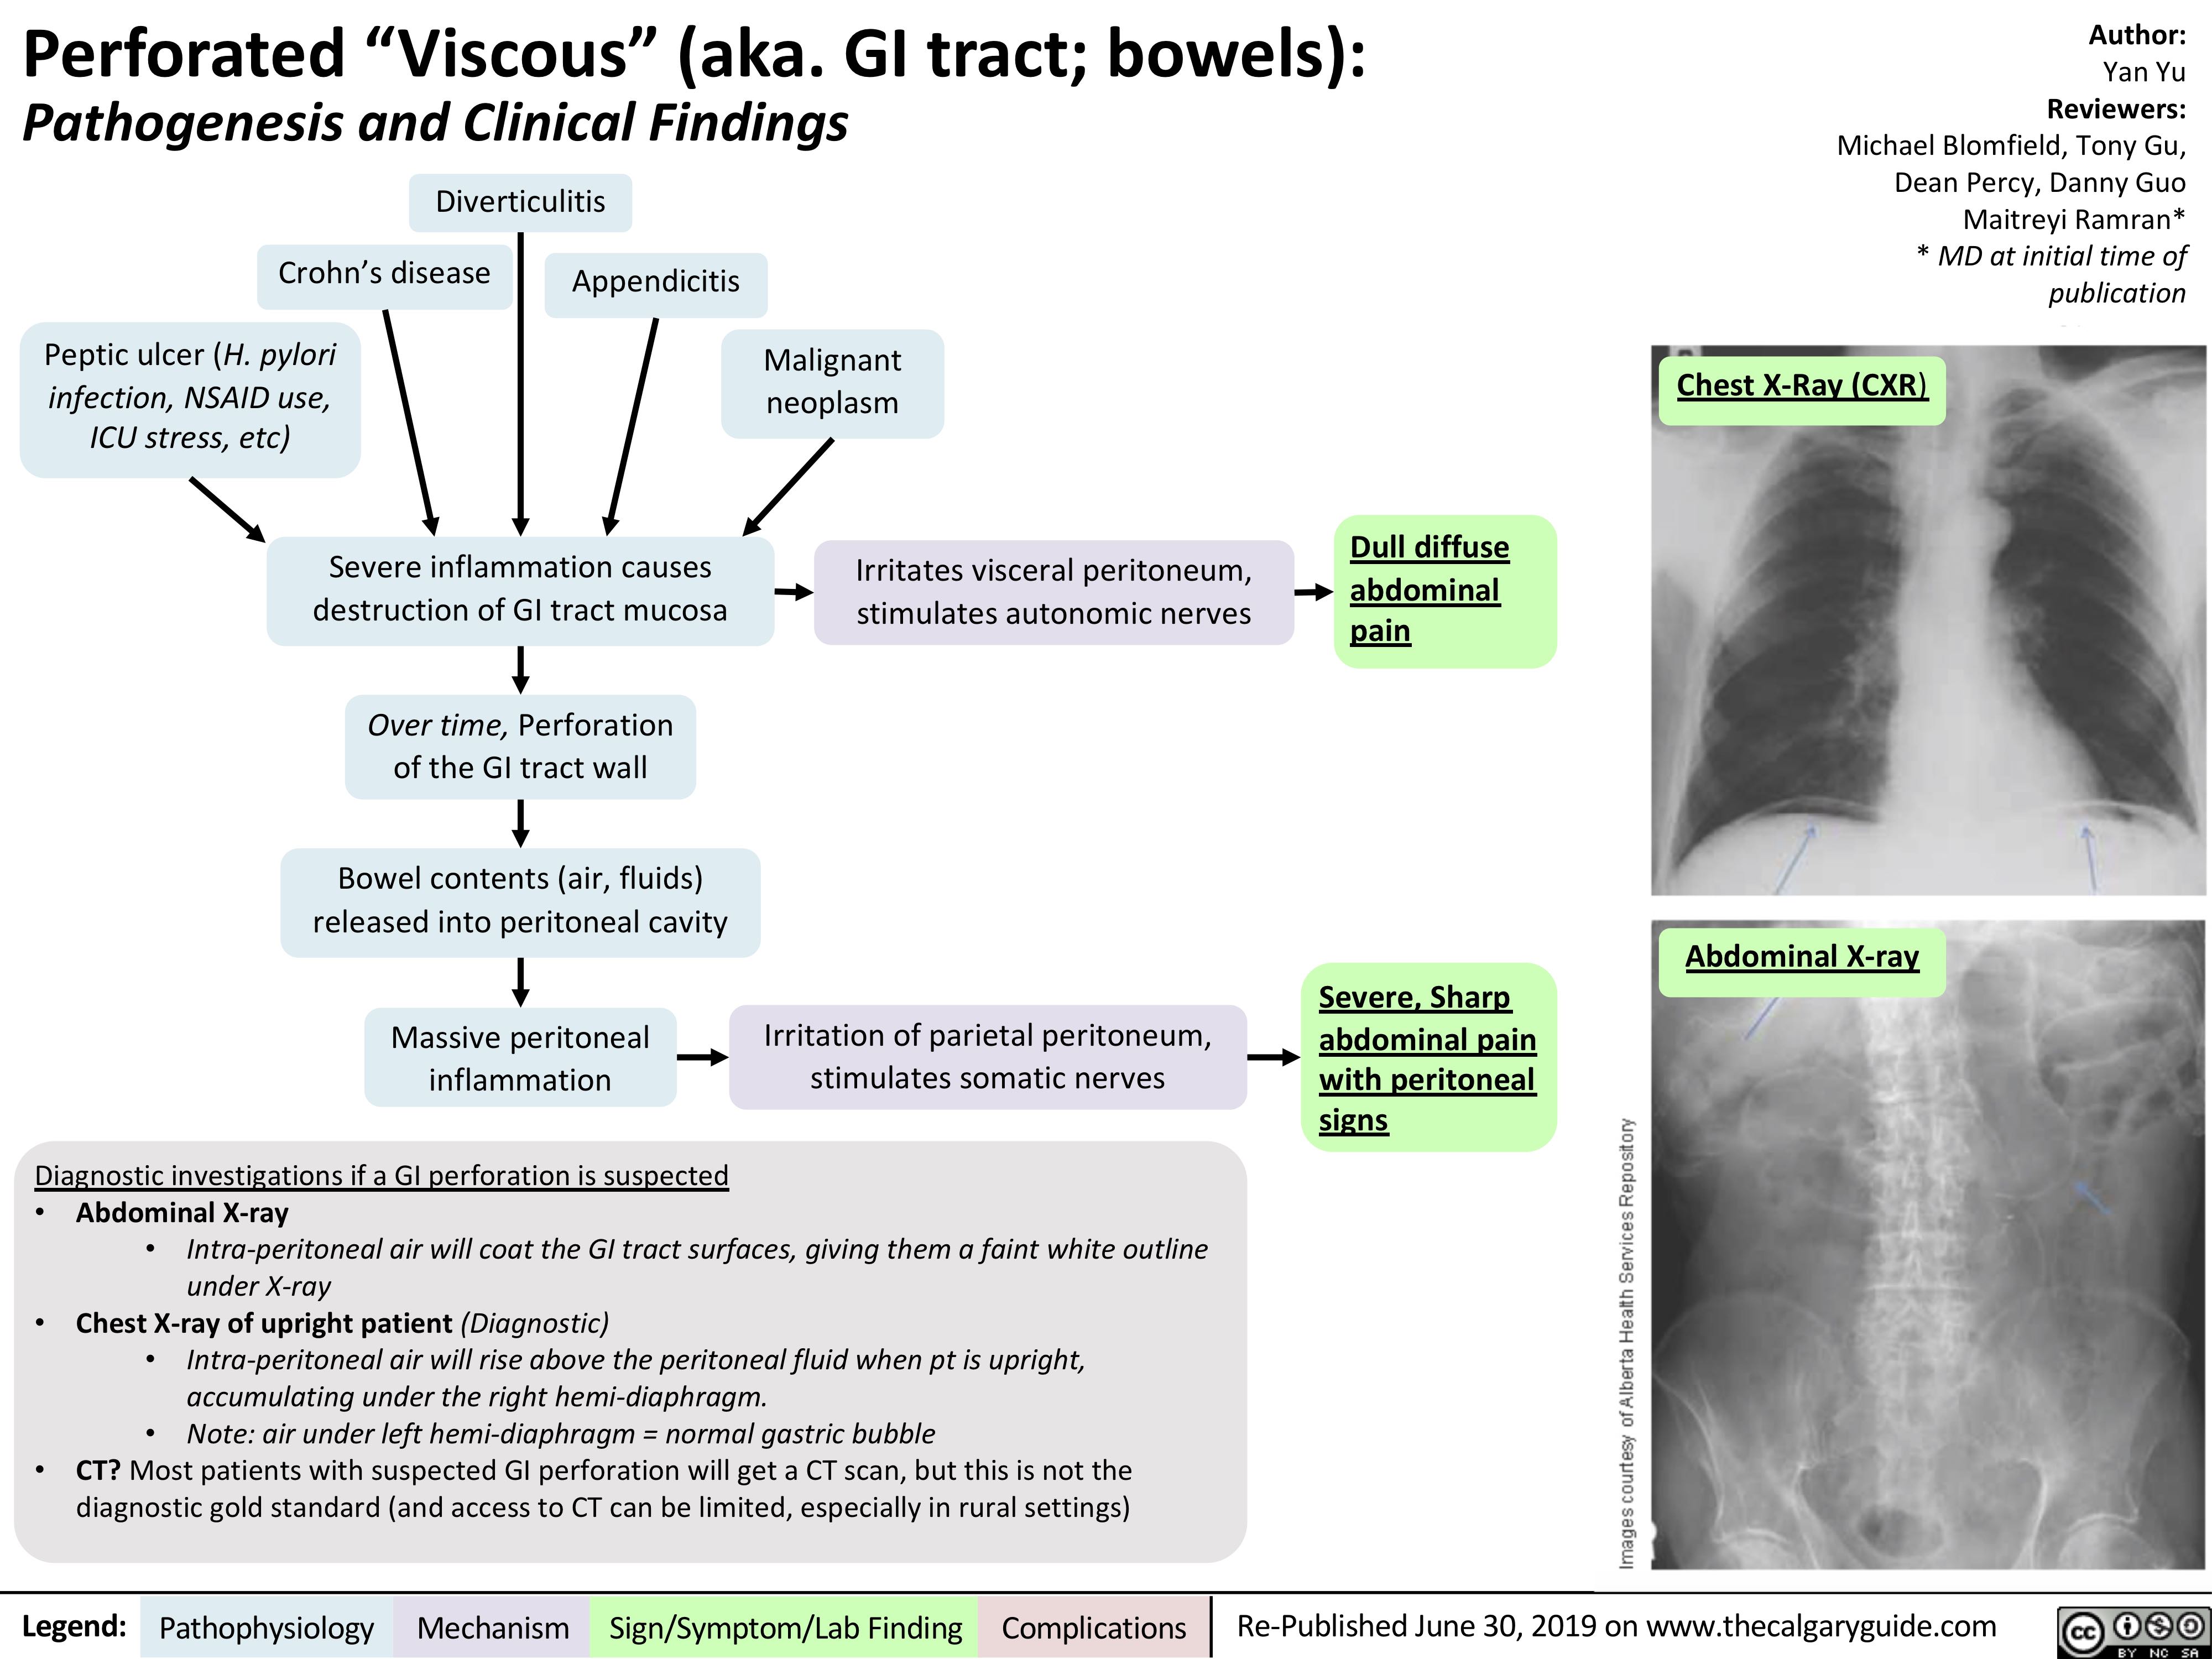 Perforated “Viscous” (aka. GI tract; bowels):
Author:
Yan Yu
Reviewers:
Michael Blomfield, Tony Gu, Dean Percy, Danny Guo Maitreyi Ramran* * MD at initial time of publication
Chest X-Ray (CXR)
Pathogenesis and Clinical Findings
Diverticulitis
   Crohn’s disease Peptic ulcer (H. pylori
infection, NSAID use, ICU stress, etc)
Appendicitis
Malignant neoplasm
Irritates visceral peritoneum, stimulates autonomic nerves
            Severe inflammation causes destruction of GI tract mucosa
Over time, Perforation of the GI tract wall
Bowel contents (air, fluids) released into peritoneal cavity
Massive peritoneal inflammation
Diagnostic investigations if a GI perforation is suspected
Dull diffuse abdominal pain
          Severe, Sharp abdominal pain with peritoneal signs
Abdominal X-ray
  Irritation of parietal peritoneum, stimulates somatic nerves
      • Abdominal X-ray
• Intra-peritoneal air will coat the GI tract surfaces, giving them a faint white outline
under X-ray
• Chest X-ray of upright patient (Diagnostic)
• Intra-peritoneal air will rise above the peritoneal fluid when pt is upright, accumulating under the right hemi-diaphragm.
• Note: air under left hemi-diaphragm = normal gastric bubble
• CT? Most patients with suspected GI perforation will get a CT scan, but this is not the diagnostic gold standard (and access to CT can be limited, especially in rural settings)
 Legend:
 Pathophysiology
 Mechanism
Sign/Symptom/Lab Finding
  Complications
Re-Published June 30, 2019 on www.thecalgaryguide.com
   